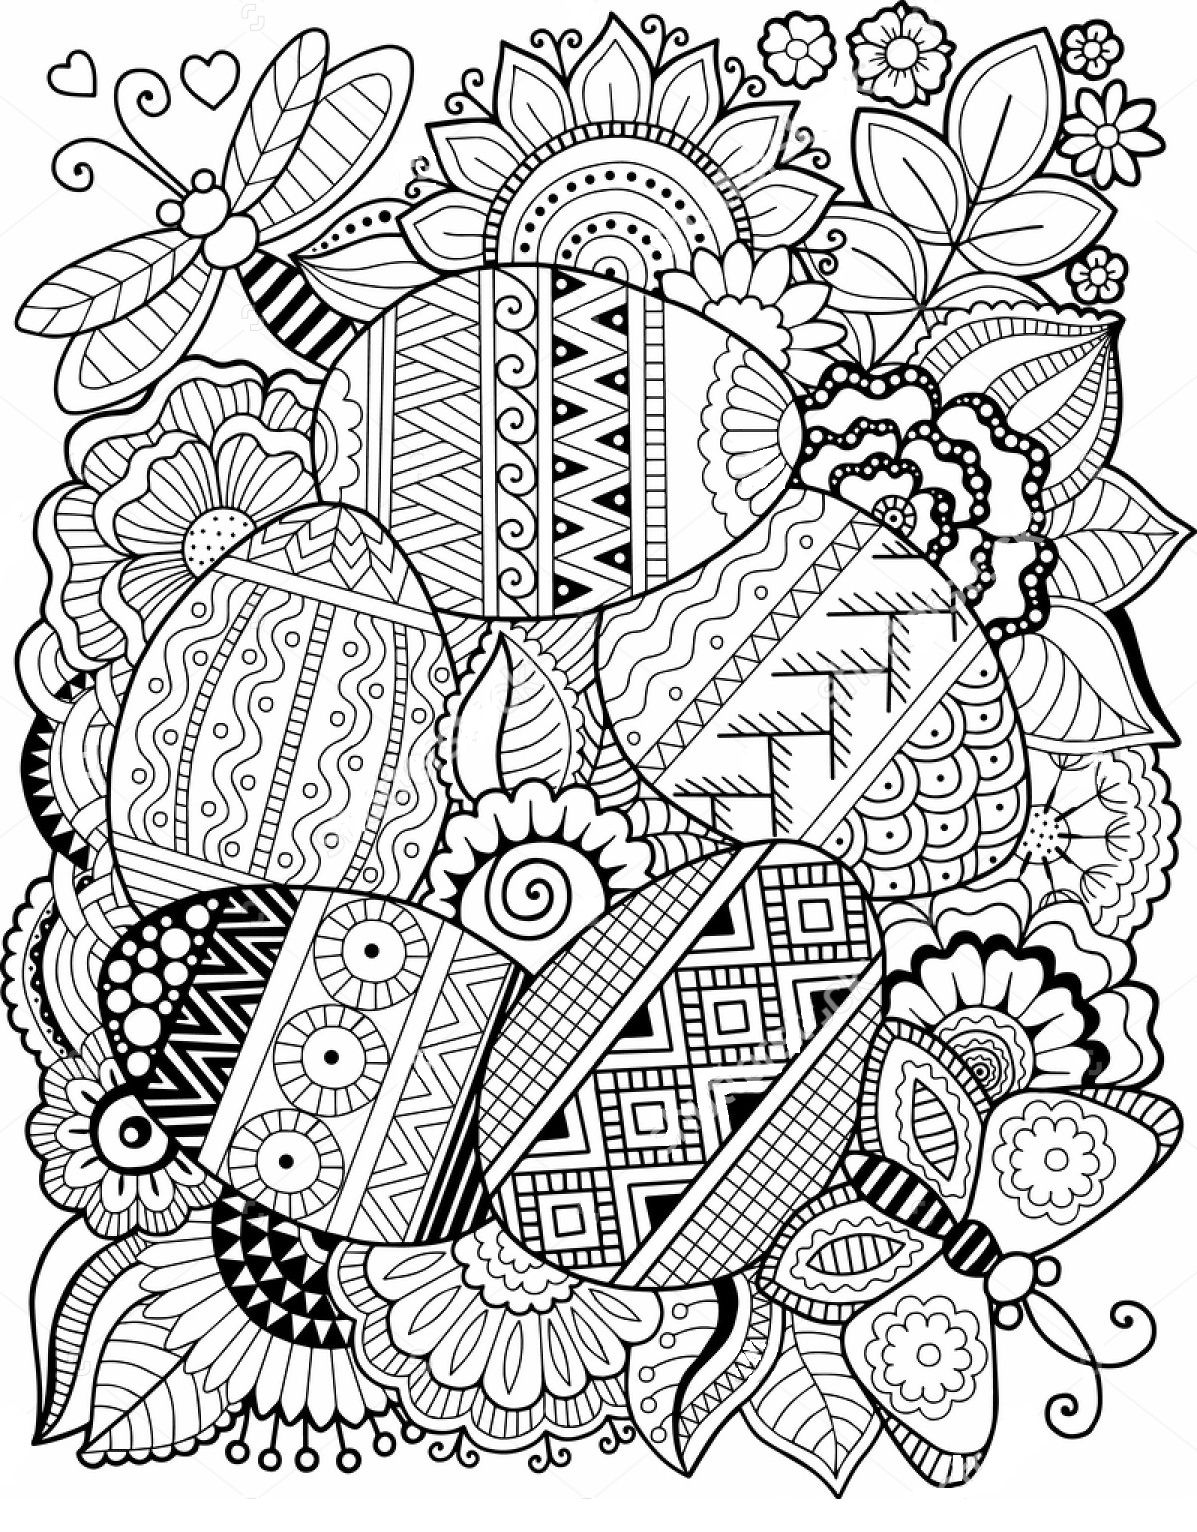 Easter Egg zentangle coloring page | Easter coloring pages ...